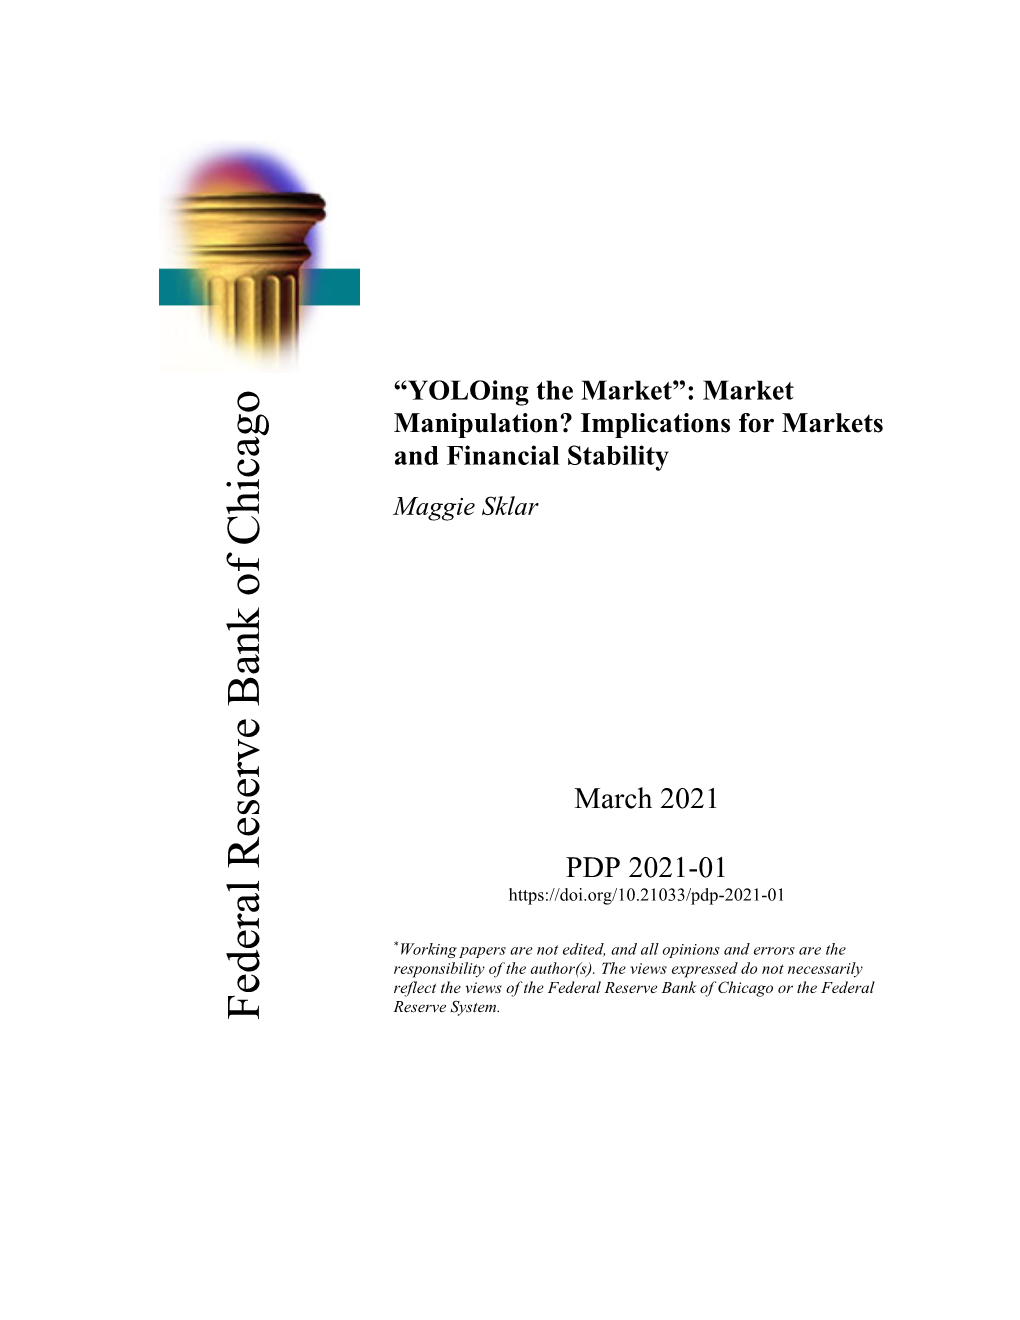 “Yoloing the Market”: Market Manipulation? Implications for Markets and Financial Stability